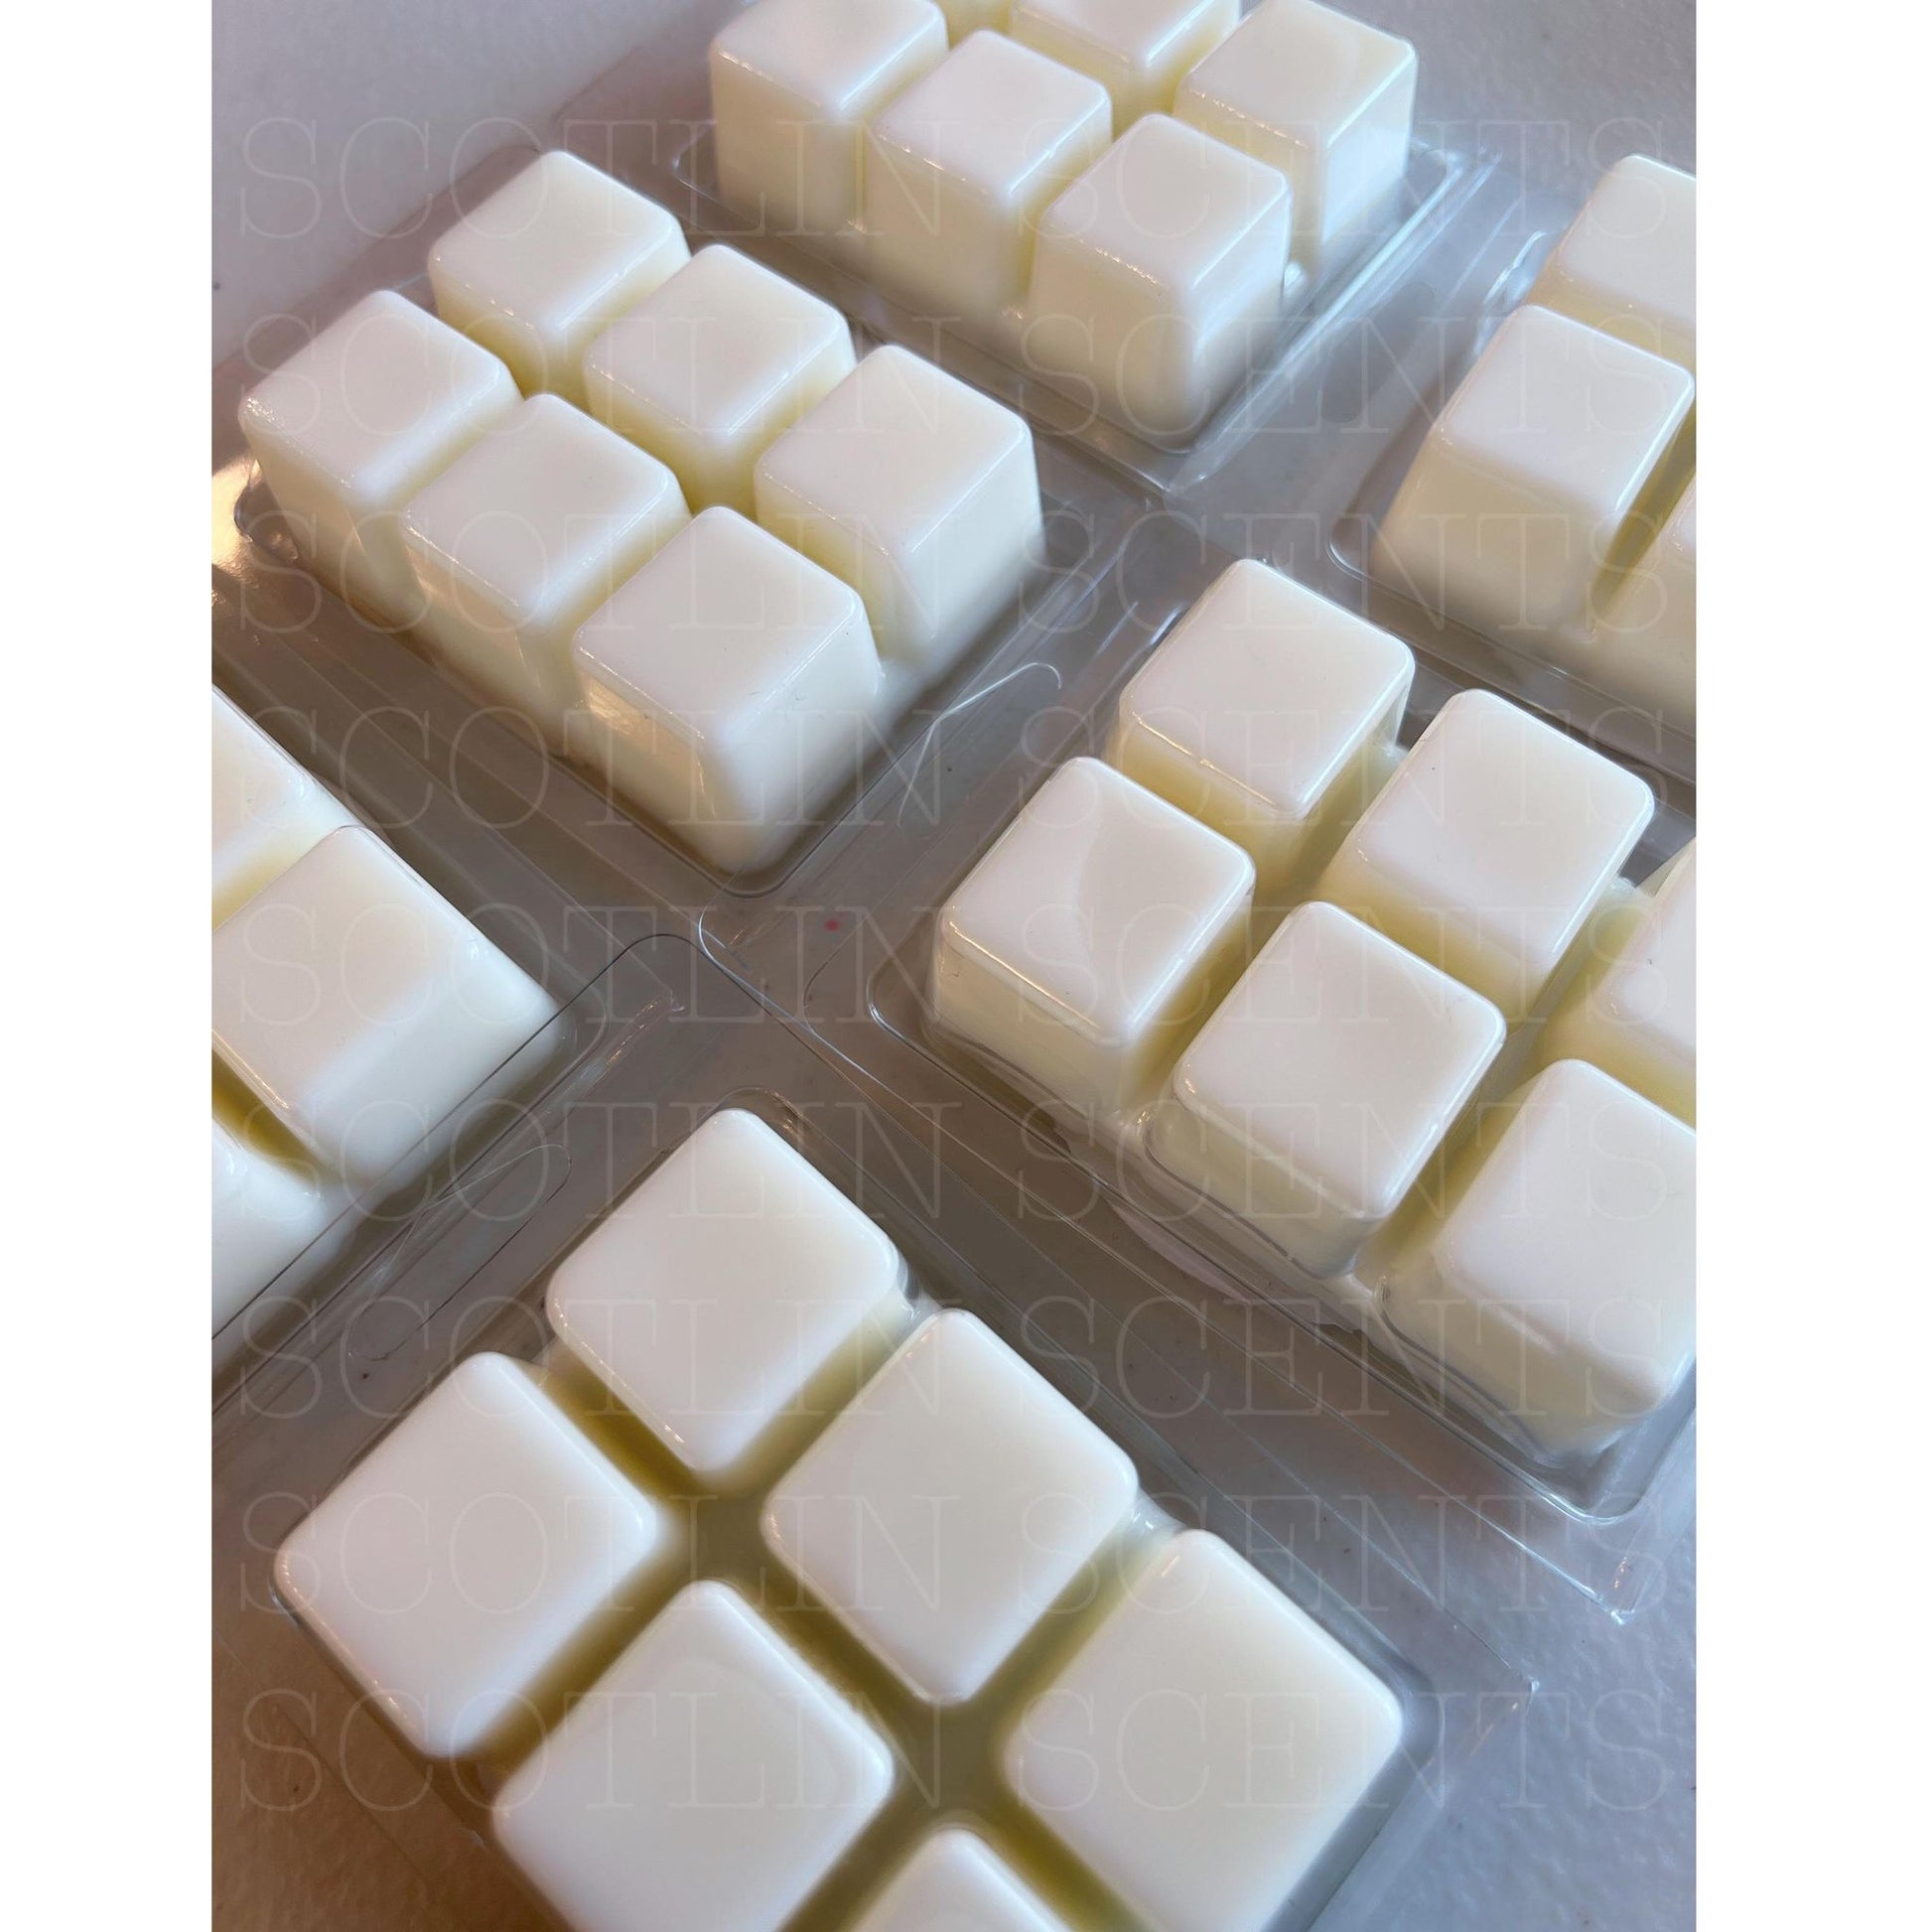 Highly Scented Wax Melts - Honeysuckle – CherryRock Creations